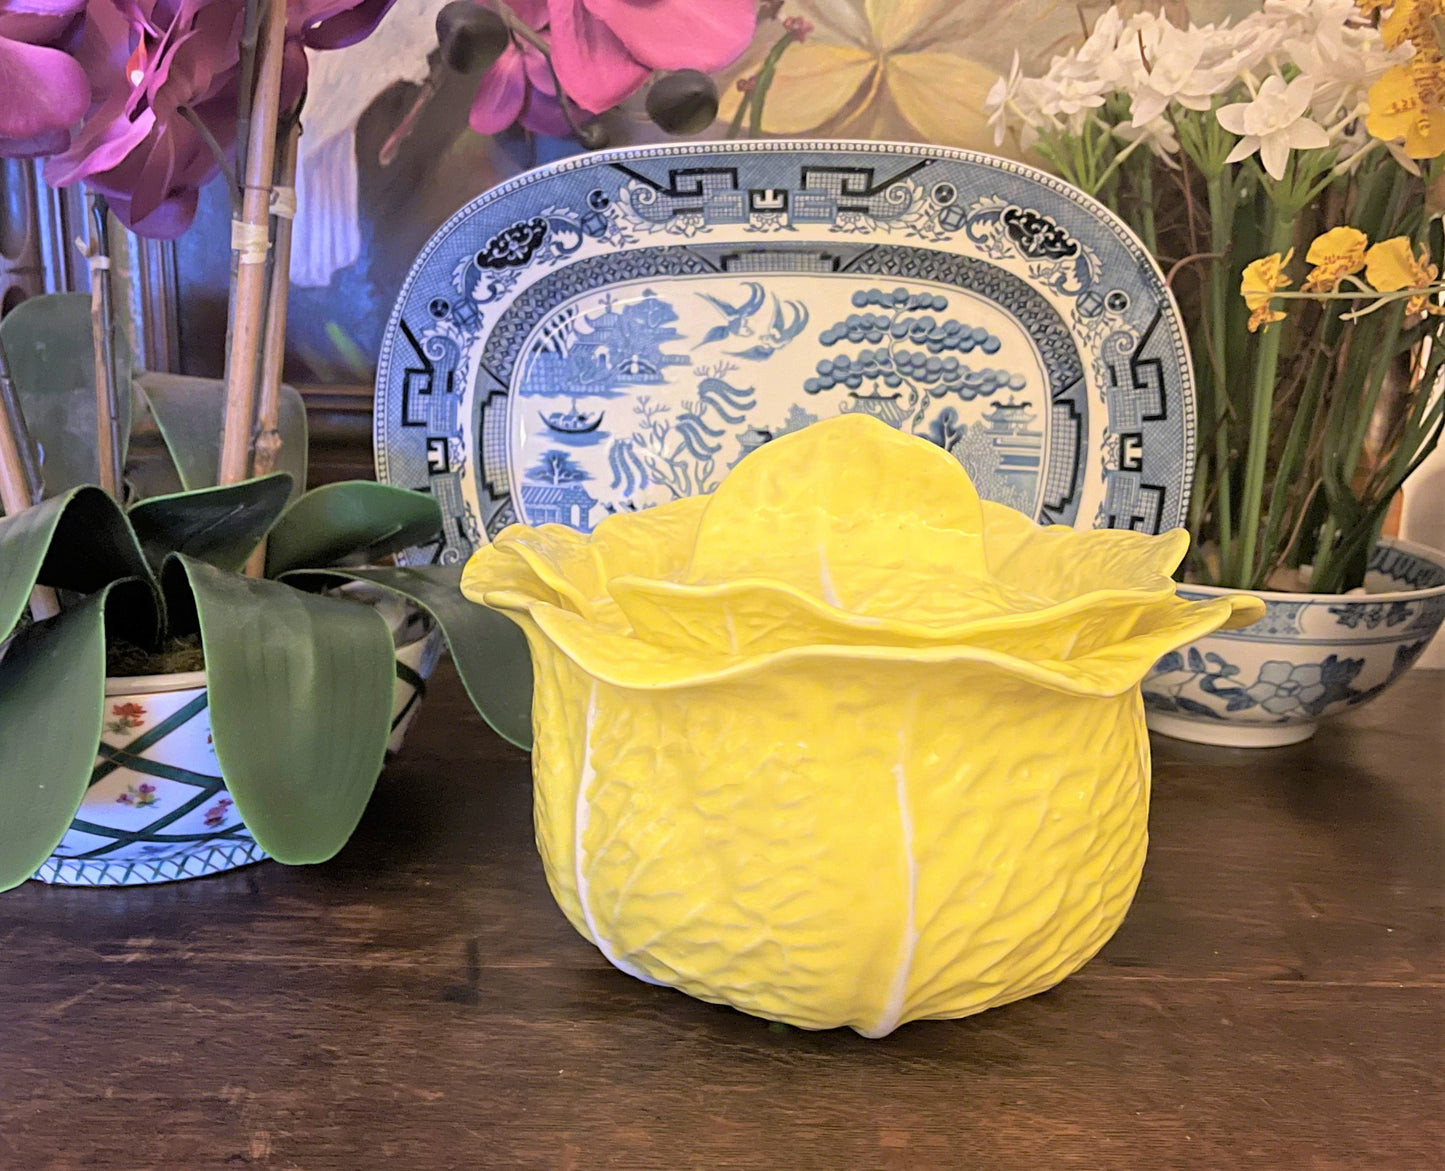 Vintage Portuguese Cabbage Tureen, Yellow Cabbage Ware Tureen by Secla, Made in Portugal